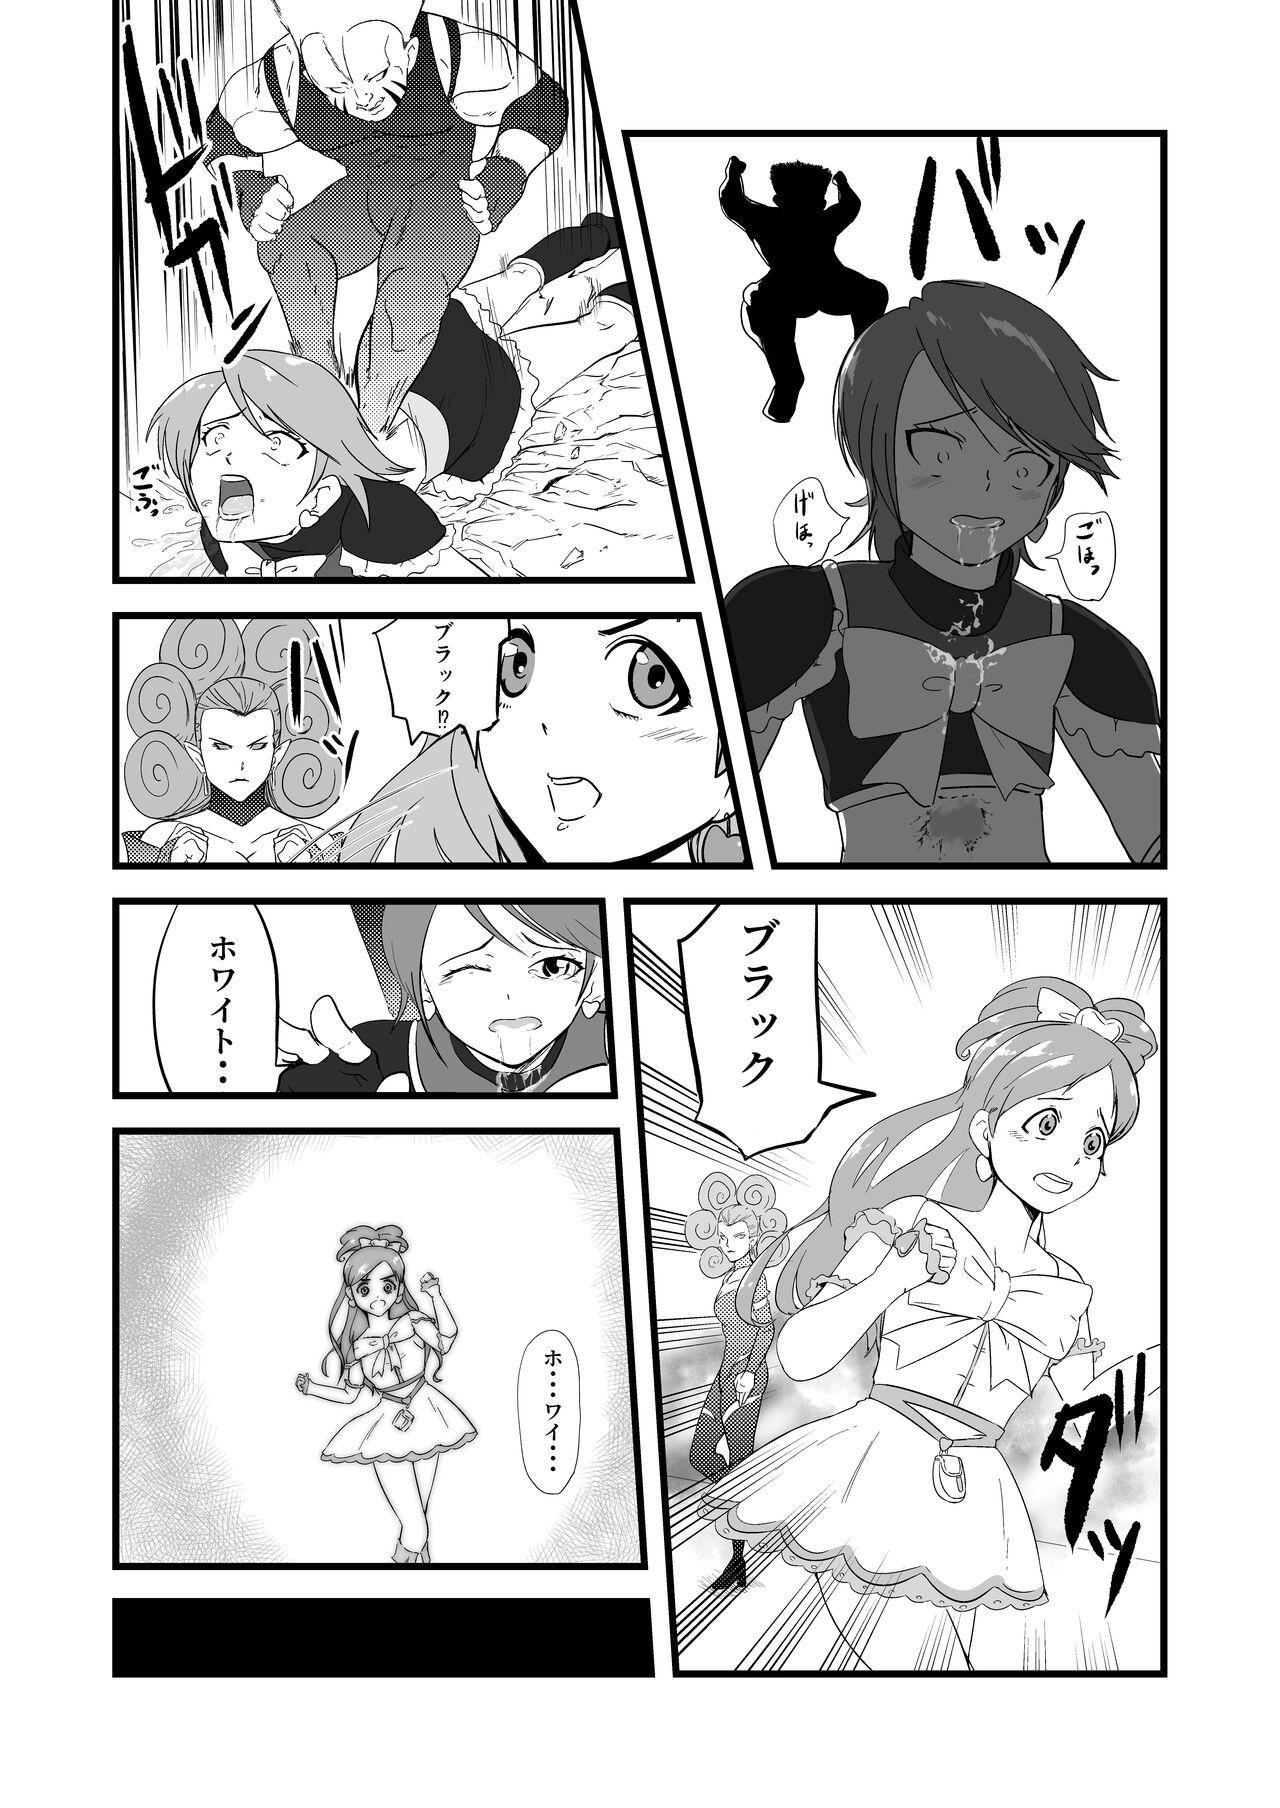 Analfuck Belly Crisis 7 - Pretty cure Bigtits - Page 4